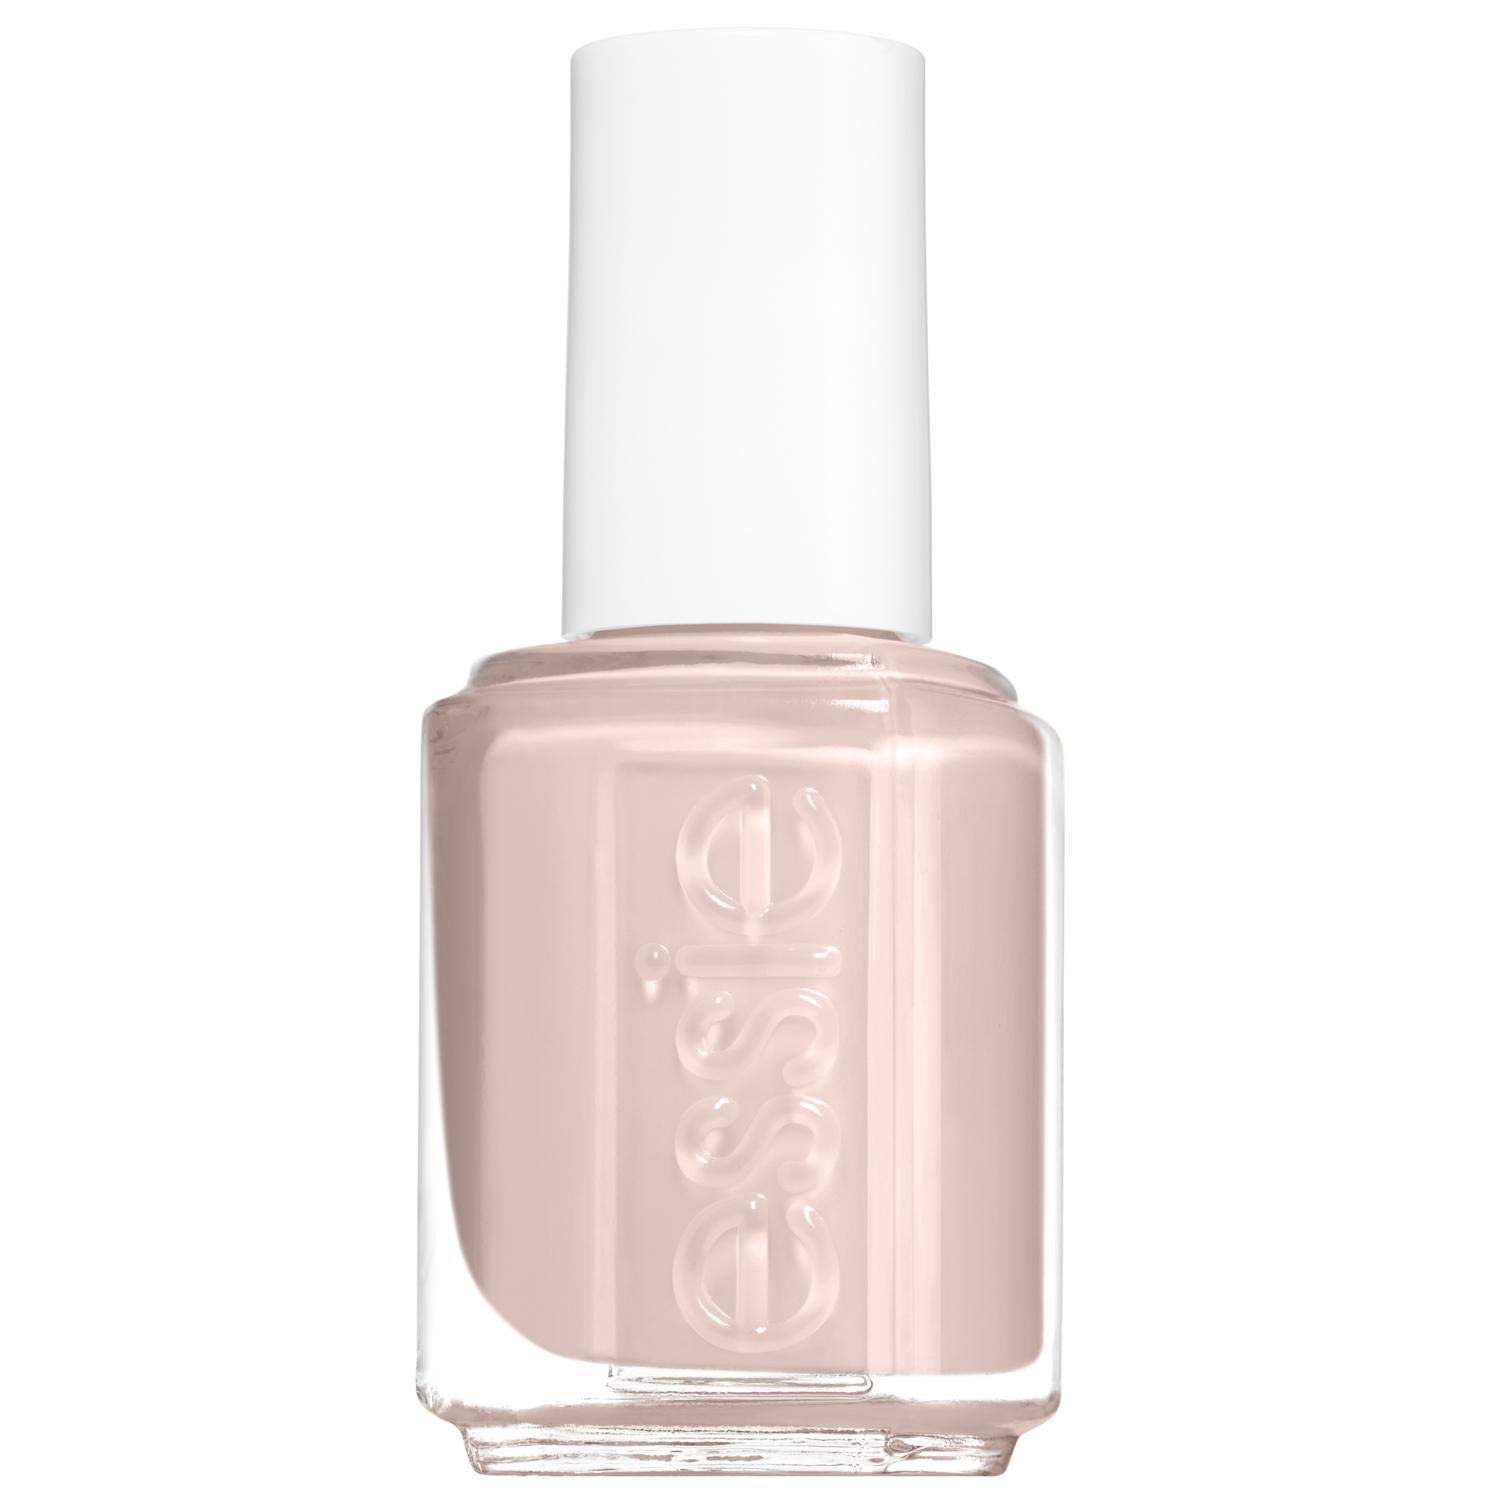  essie Nail Polish, Glossy Shine Finish, Ballet Slippers, 0.46 Ounces (Packaging May Vary)